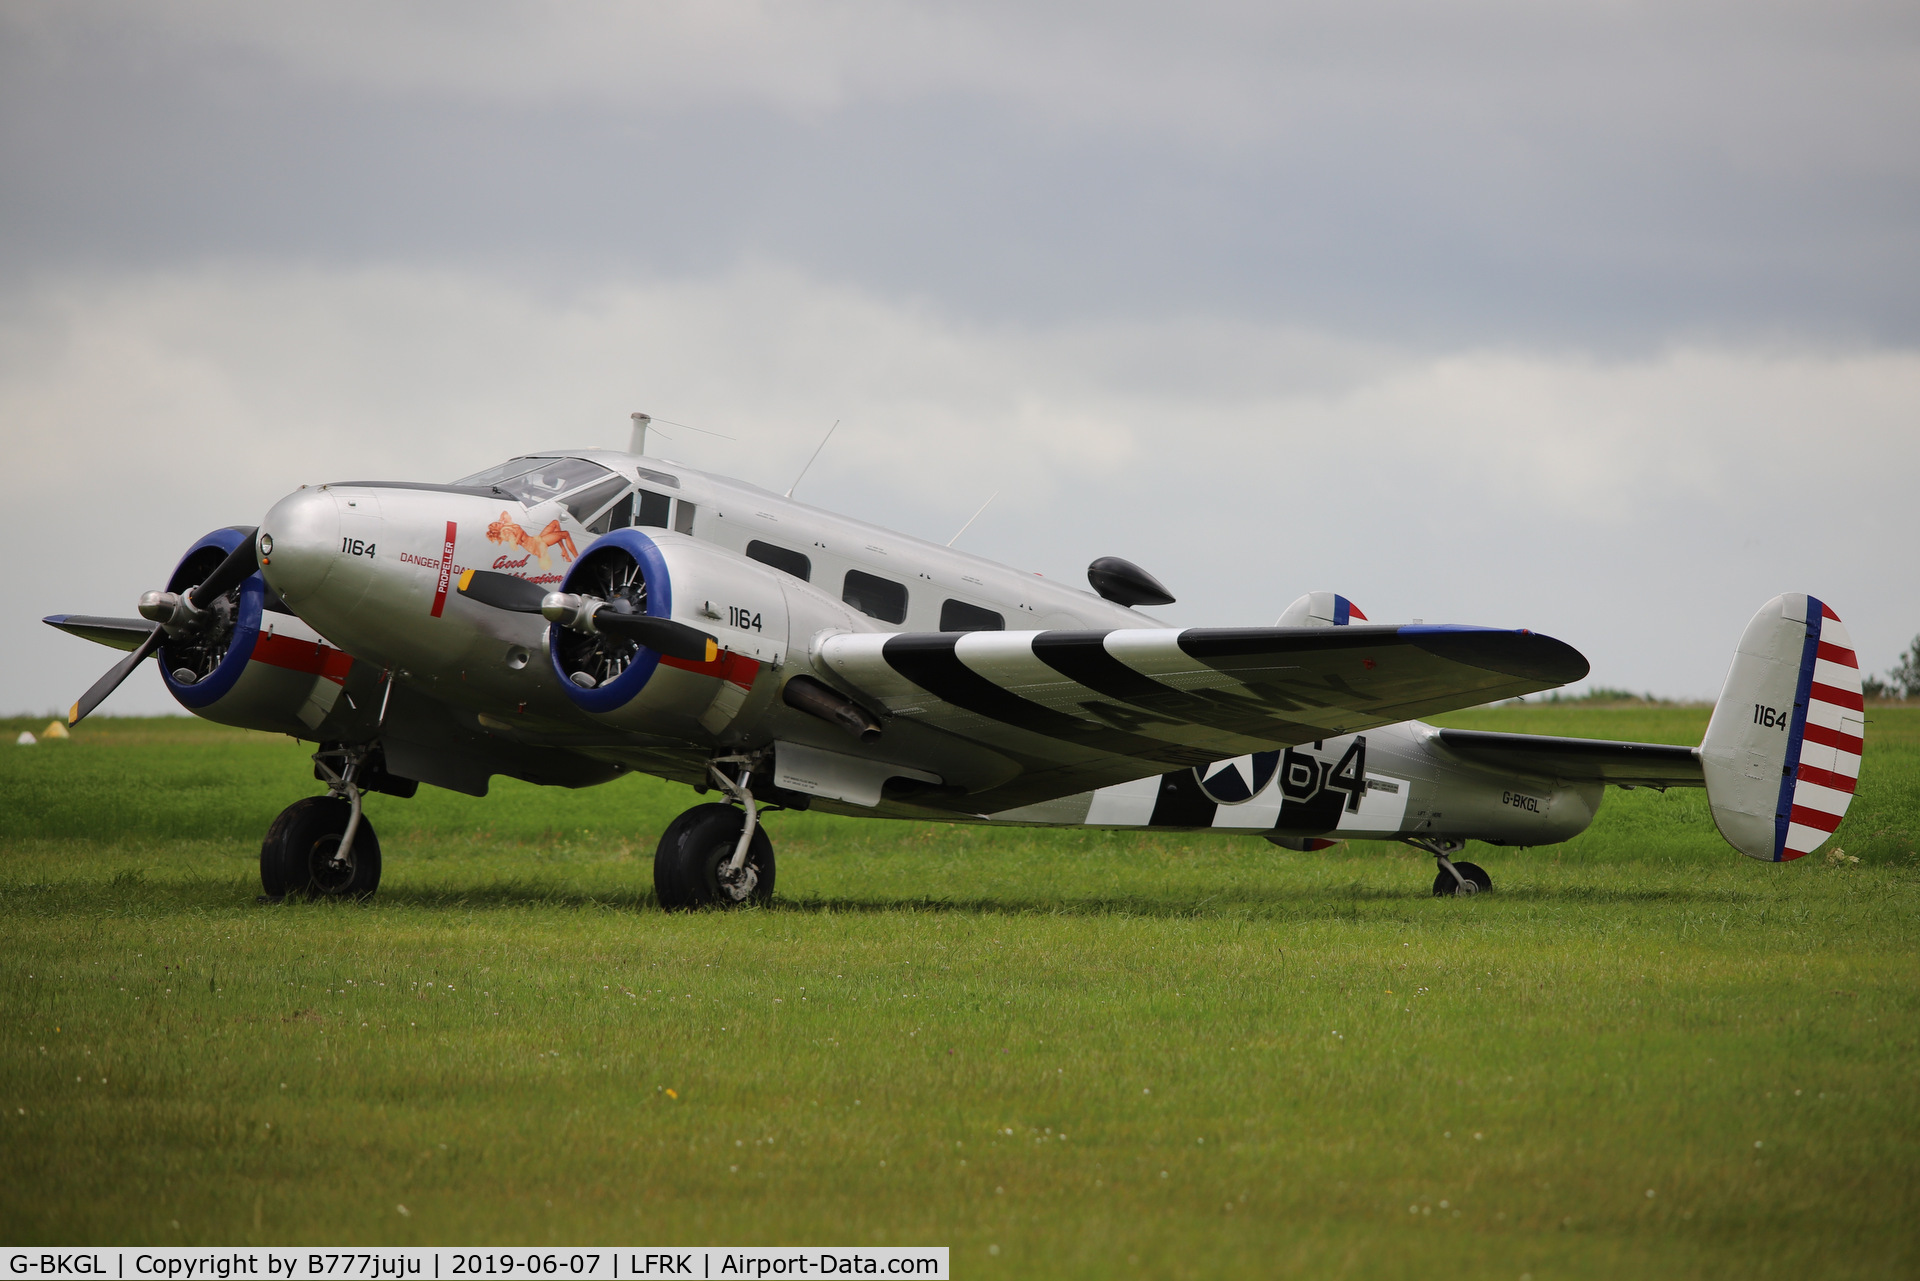 G-BKGL, 1952 Beech Expeditor 3TM C/N CA-164 (A-764), for 75 D-Day anniversary